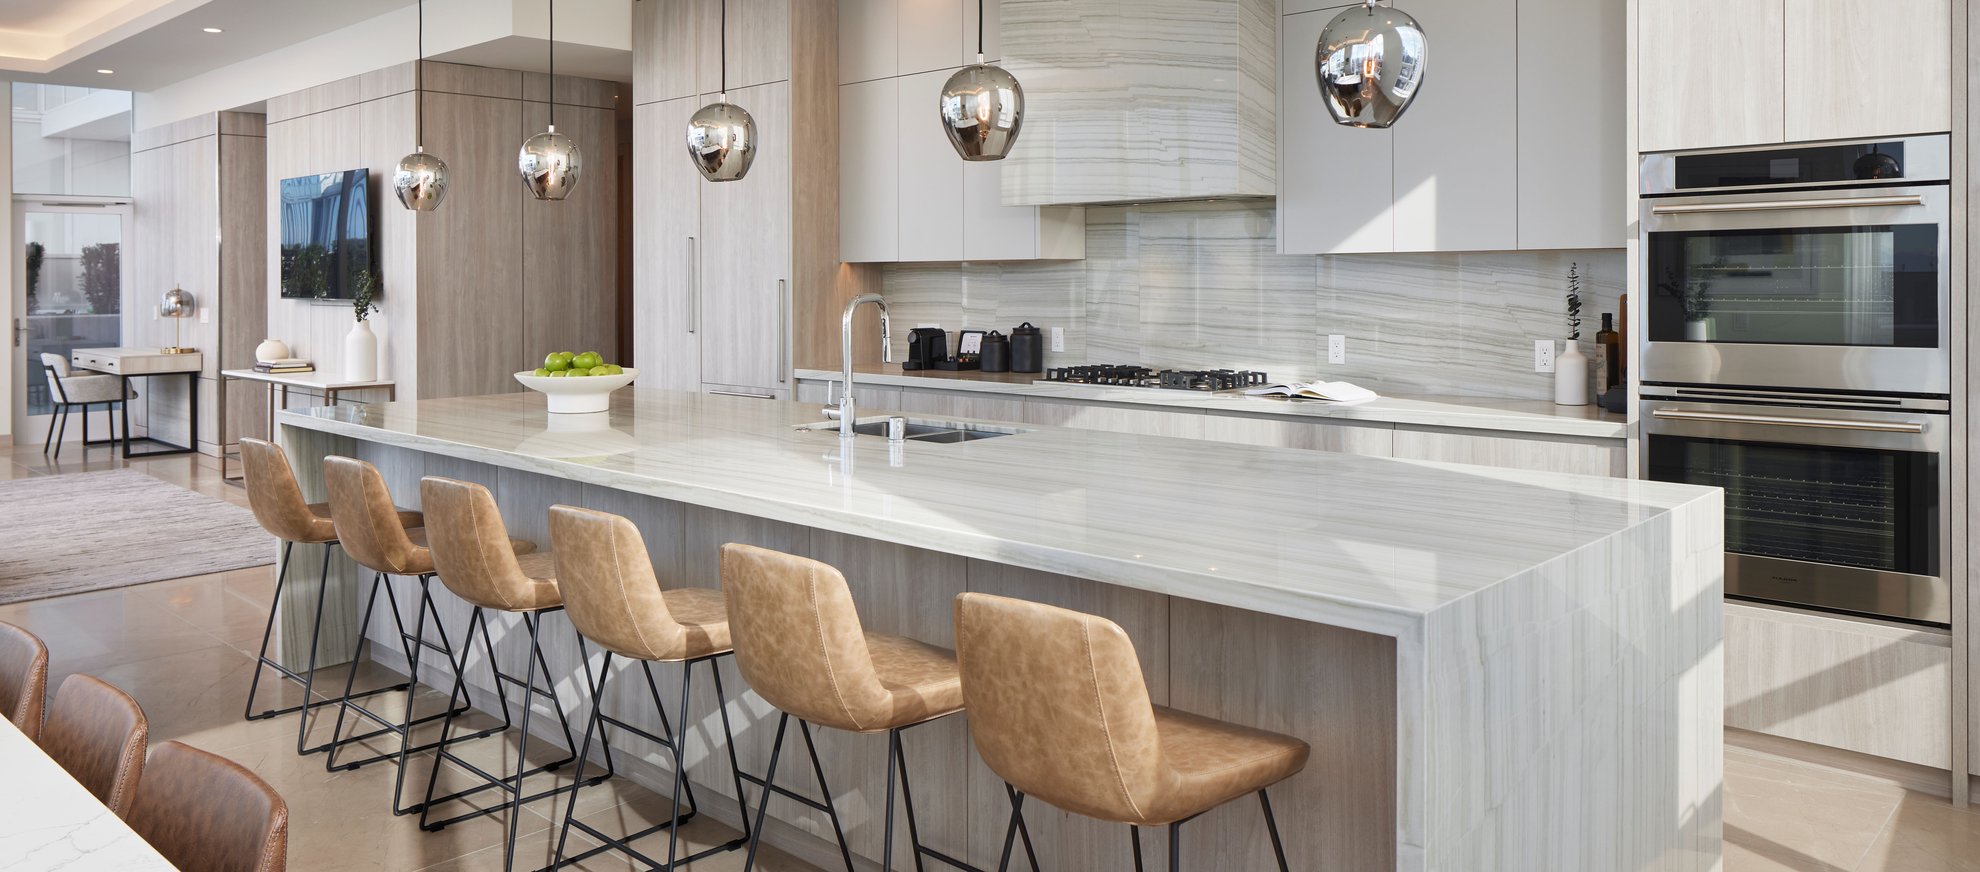 modern kitchen at penthouse level seattle features long island, stainless steel appliances, dining area.jpg